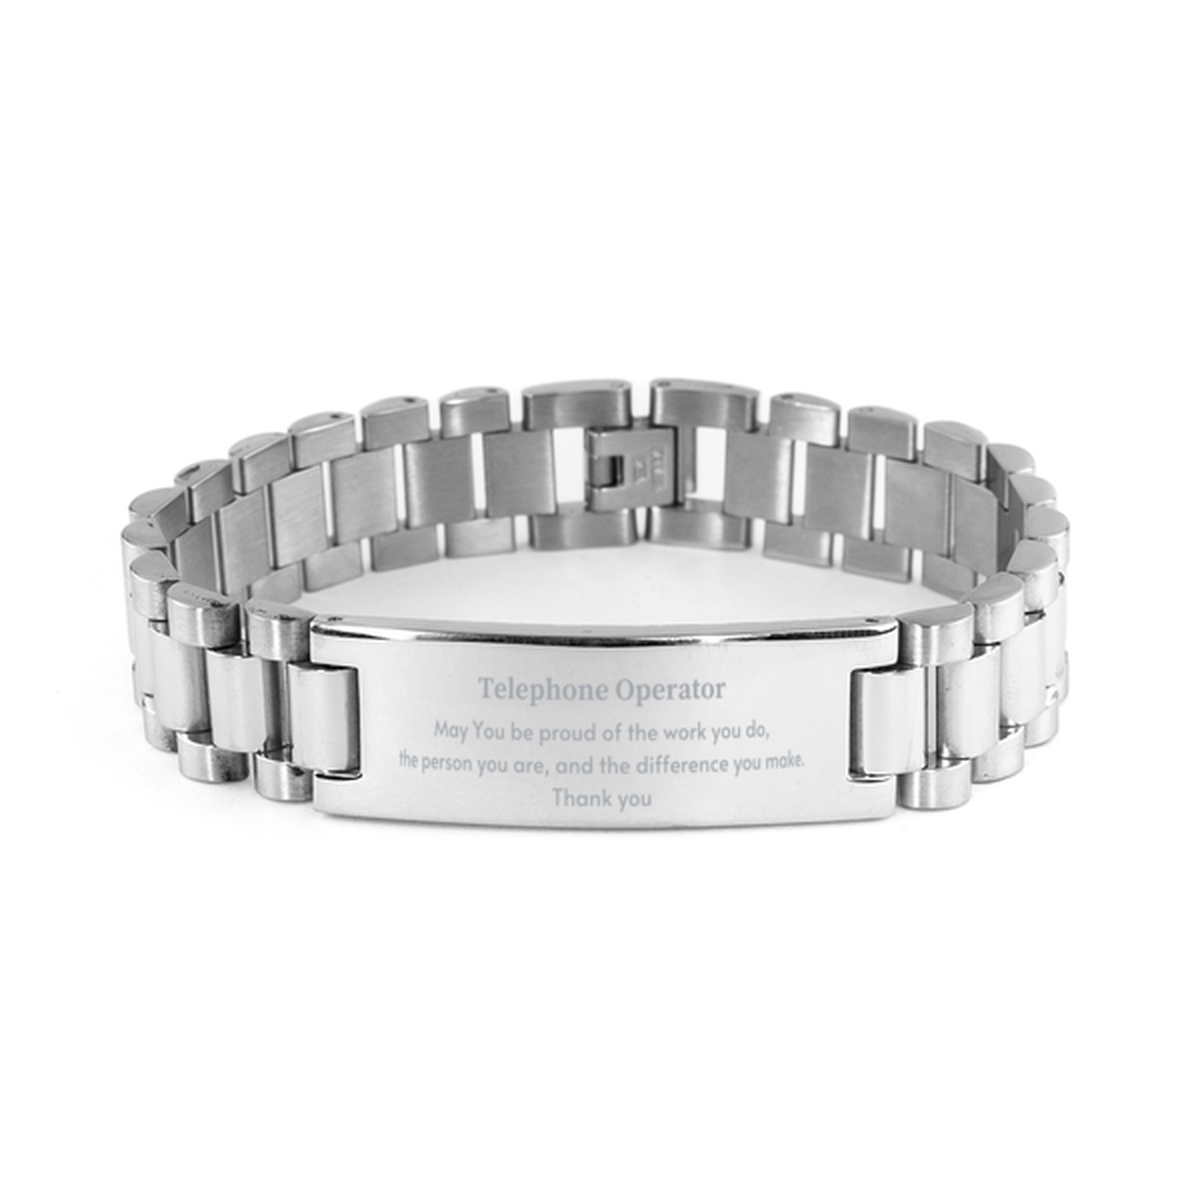 Heartwarming Ladder Stainless Steel Bracelet Retirement Coworkers Gifts for Telephone Operator, Telephone Operator May You be proud of the work you do, the person you are Gifts for Boss Men Women Friends